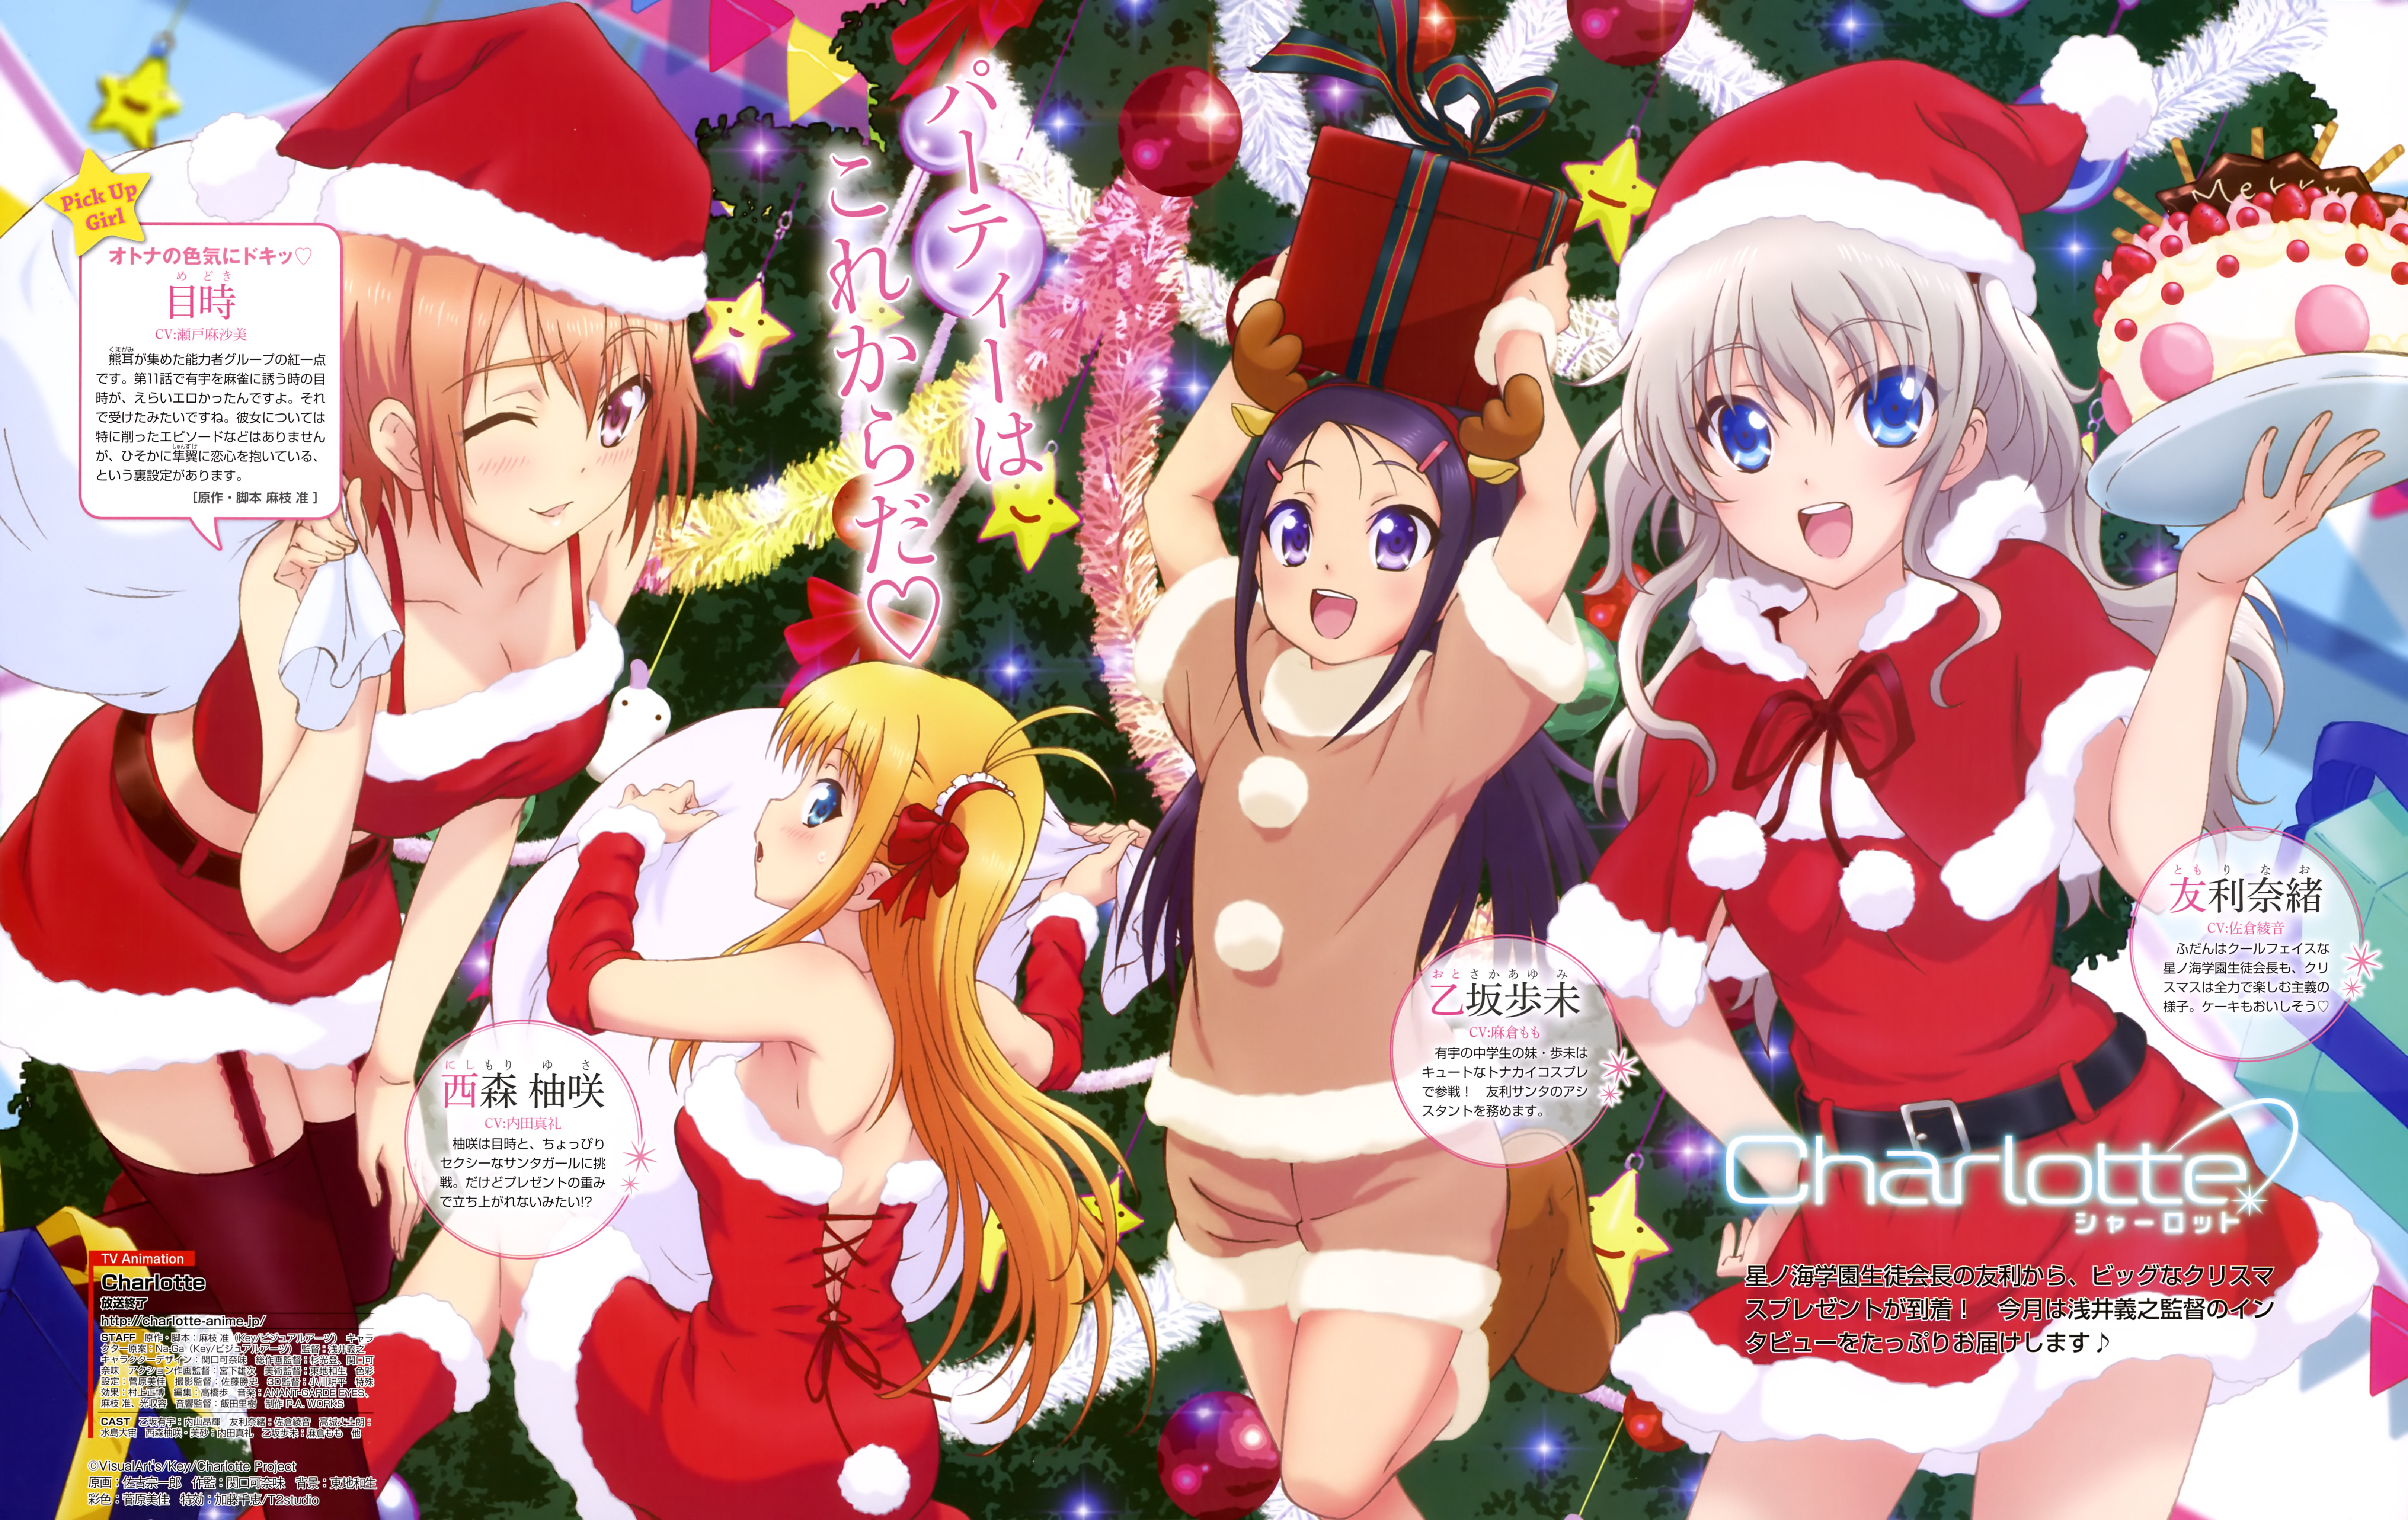 Get Christmassy with This New Charlotte Visual